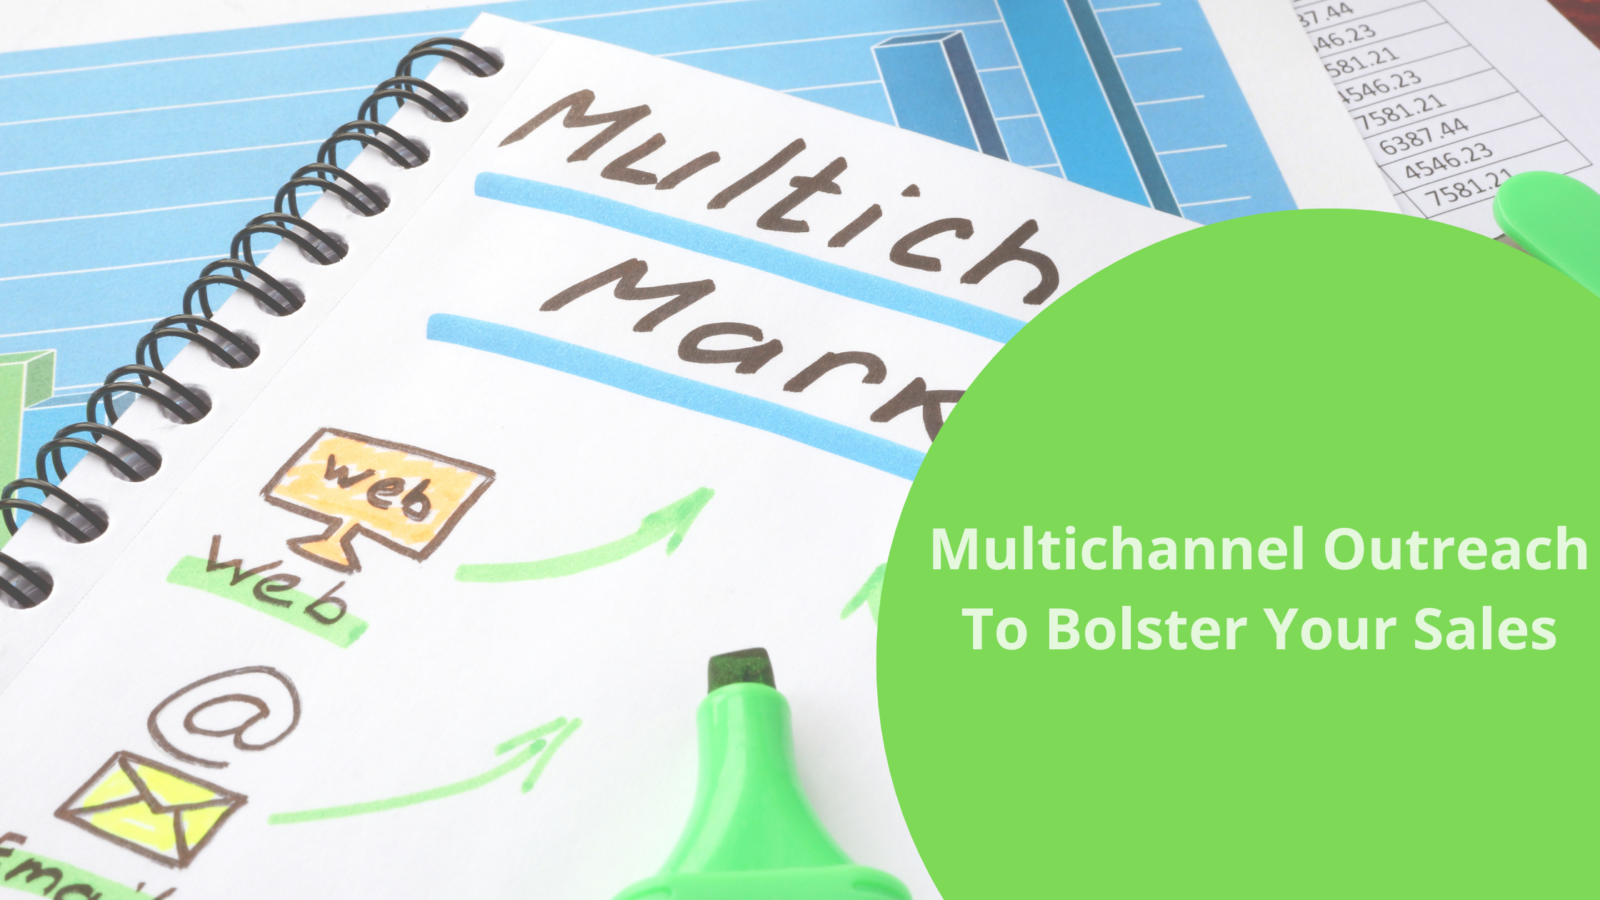 How does a multichannel outreach bolster your sales? | bookafy